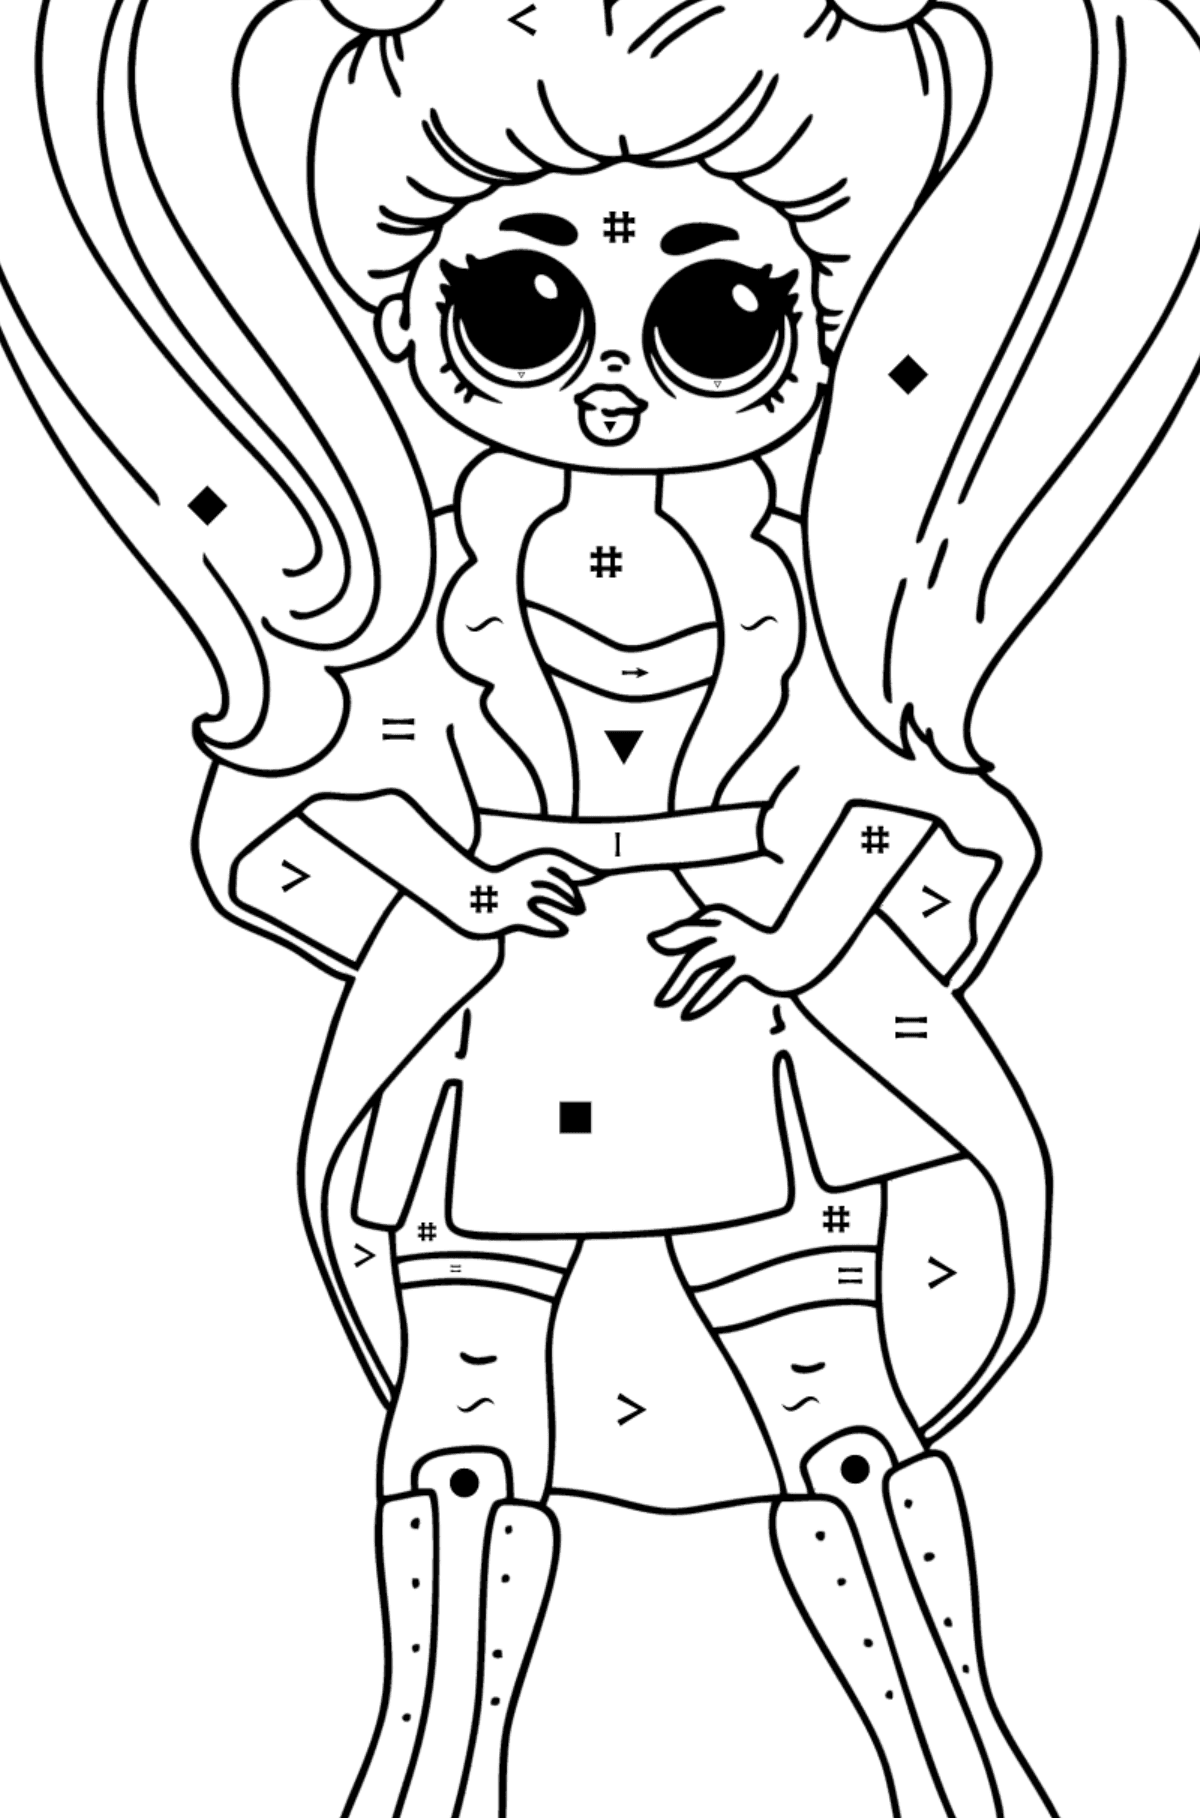 Coloring page LOL OMG Doll - Coloring by Symbols for Kids